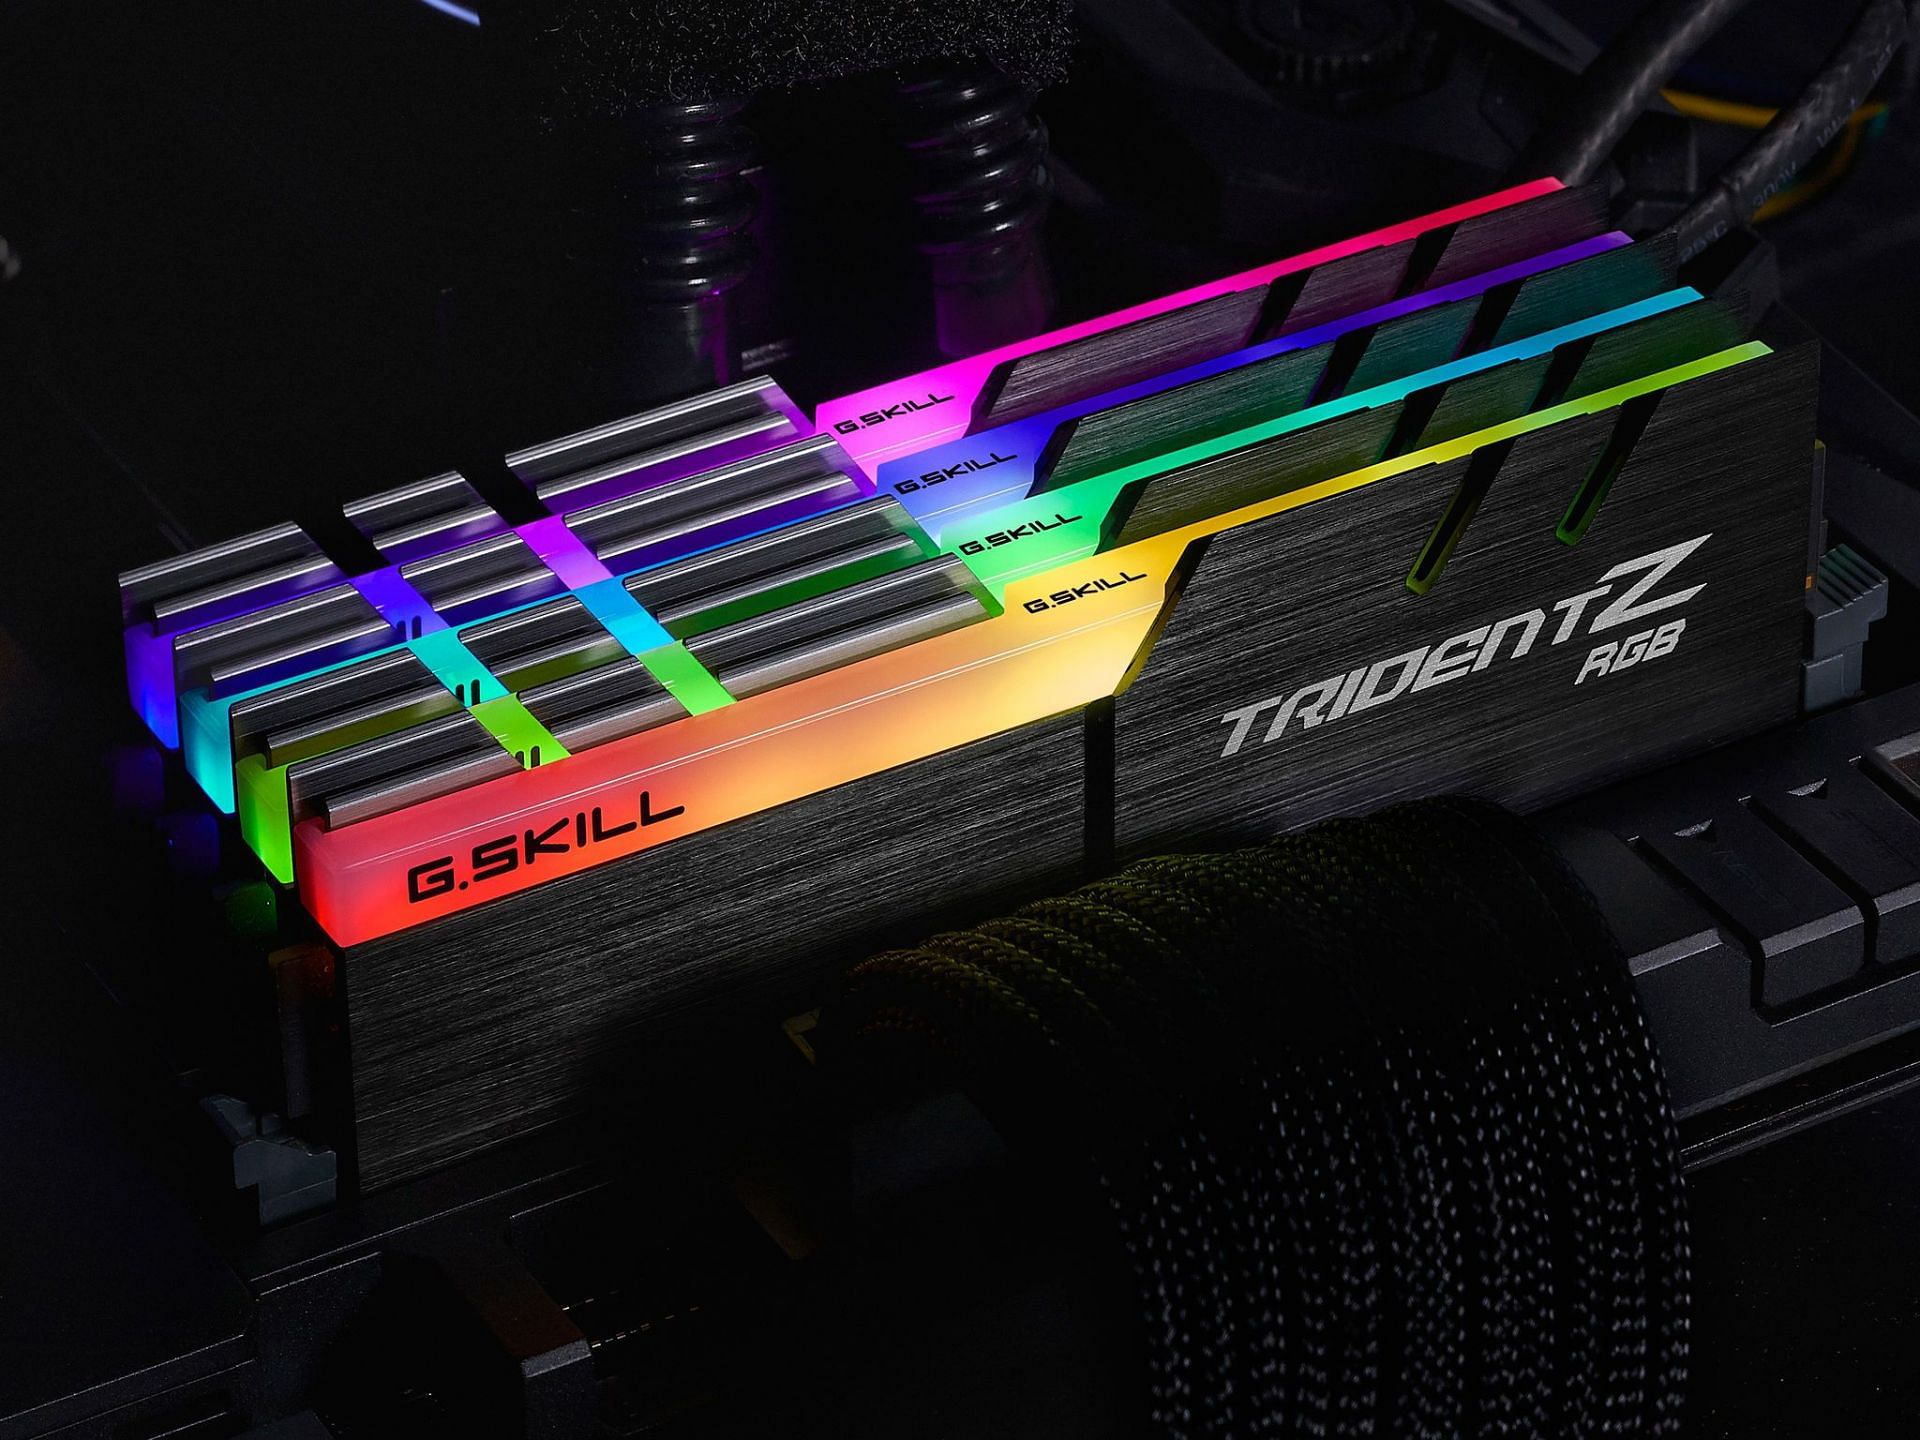 RAM is necessary for a good gaming